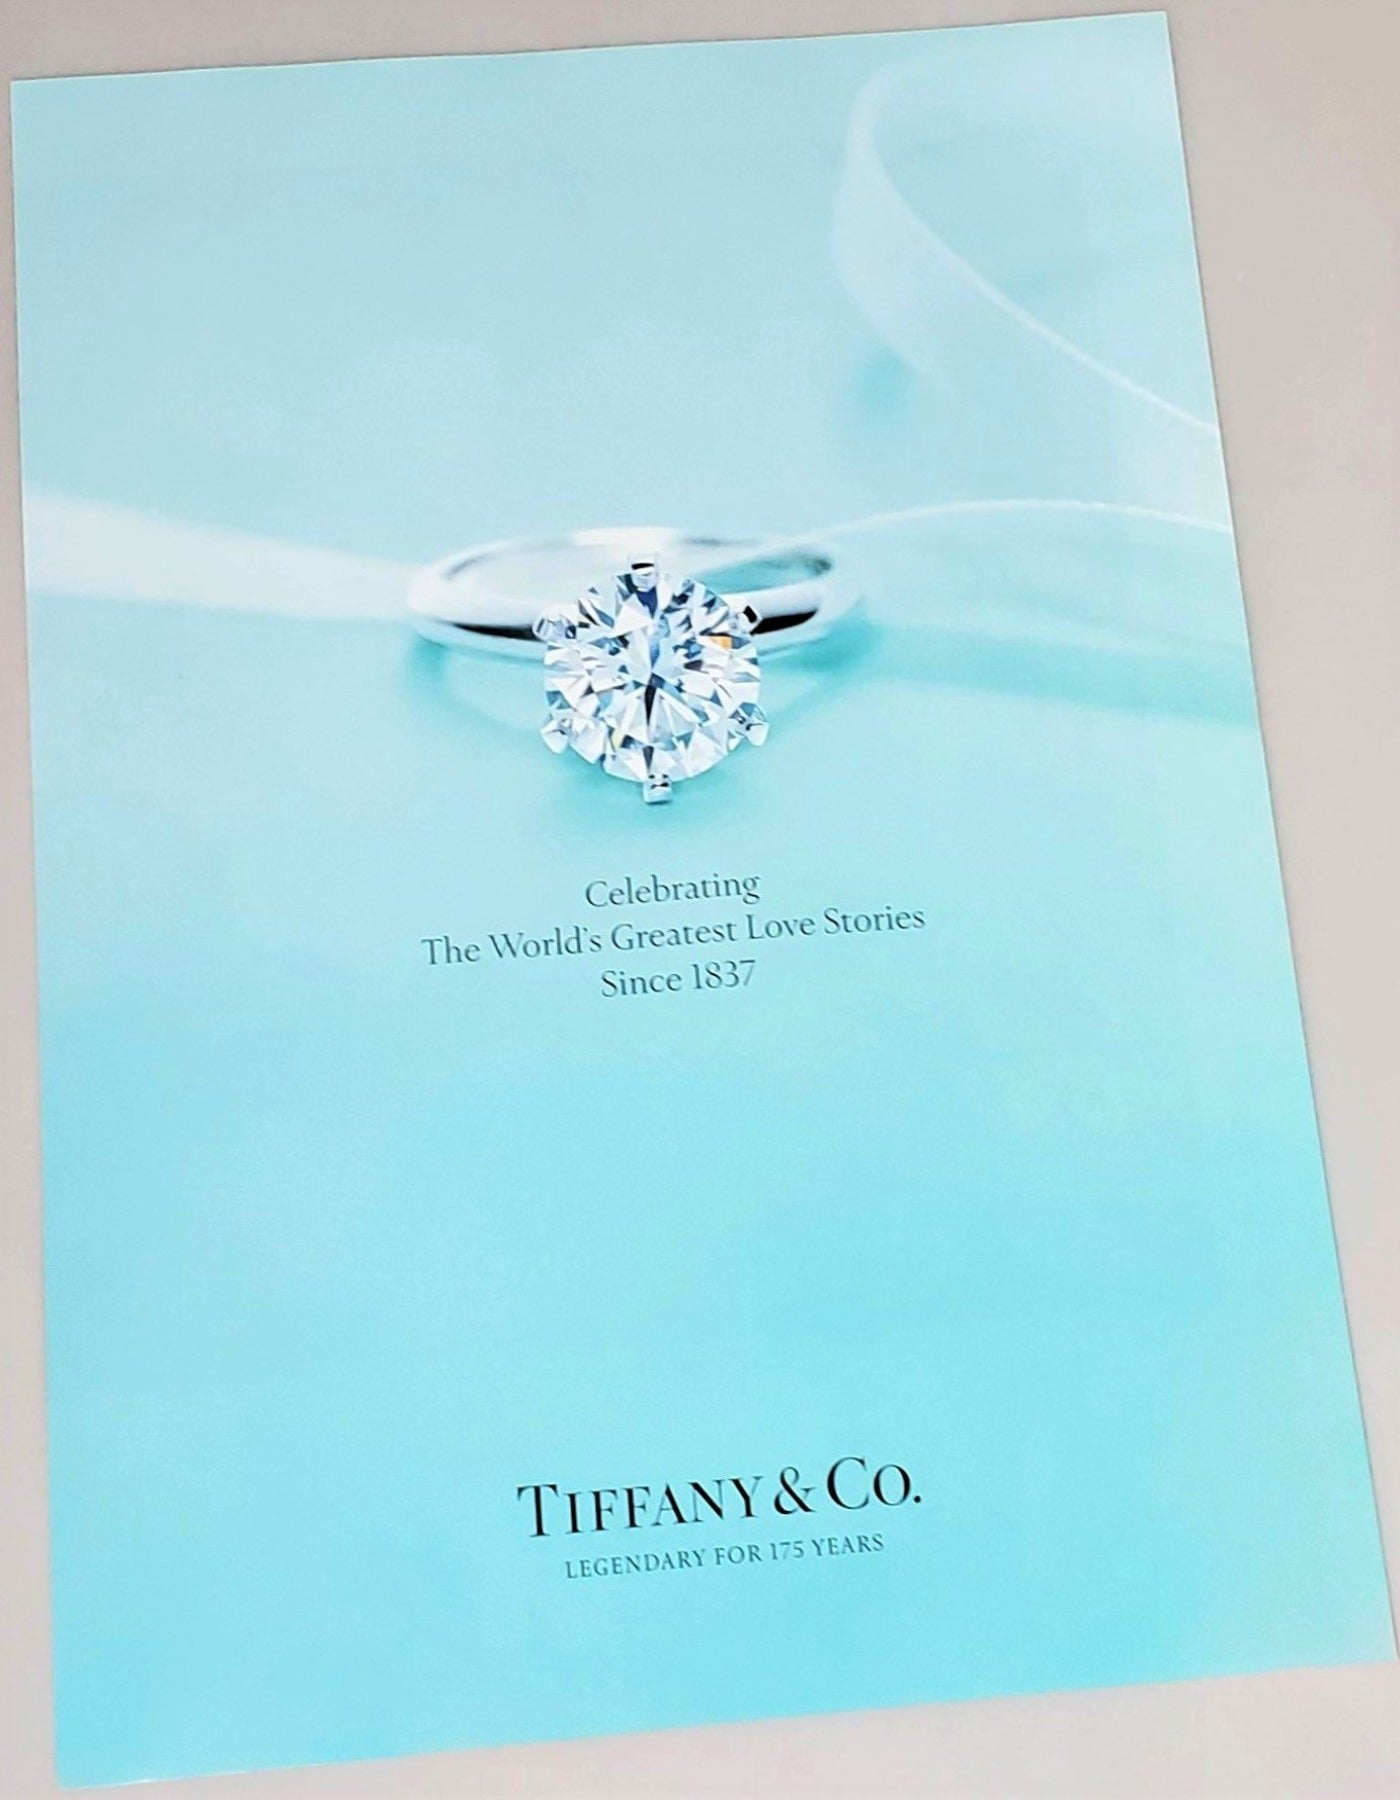 Original Tiffany & Co photograph advertisement page featured in September 2012 fashion issue of Vogue magazine